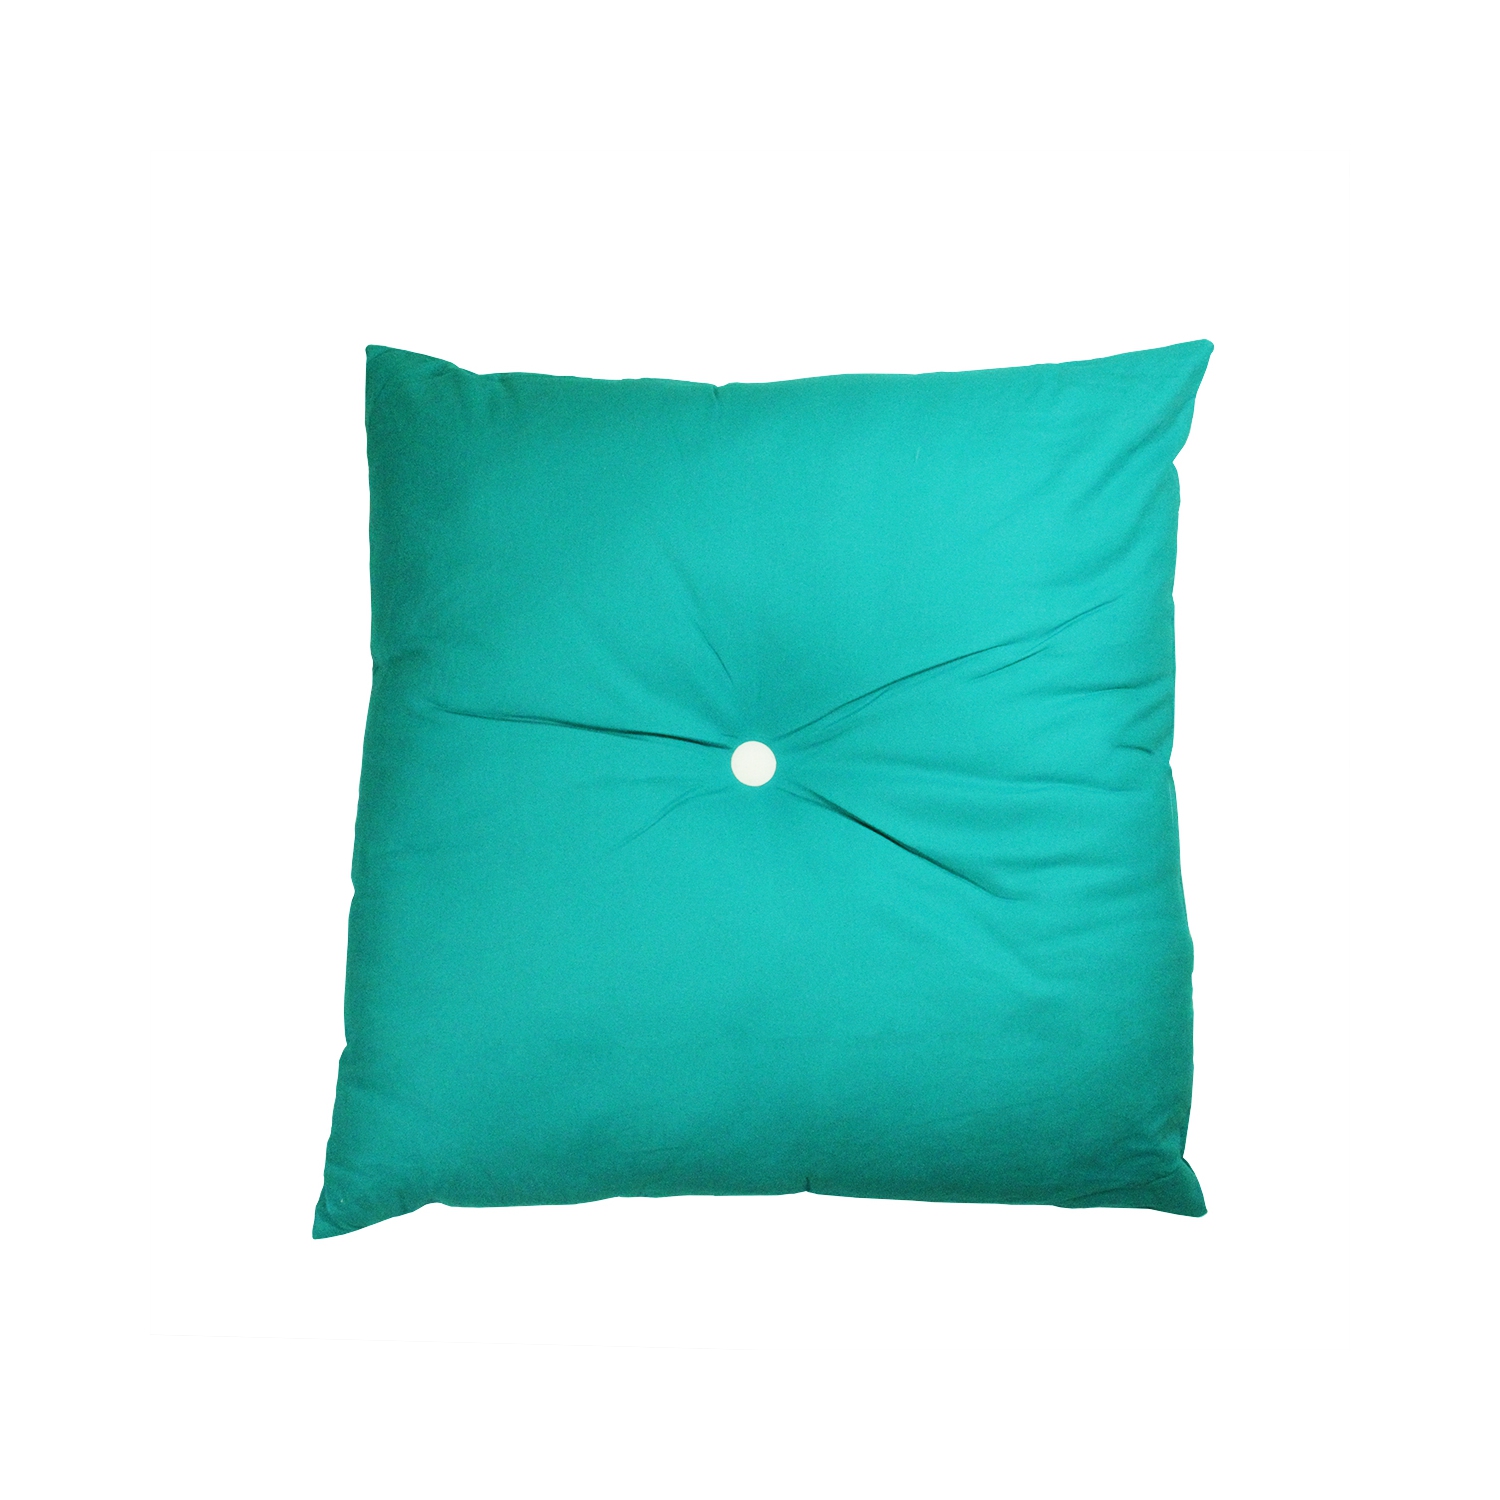 30" Urban Life Over-Sized Solid Turquoise Blue and White Tufted Decorative Floor Throw Pillow